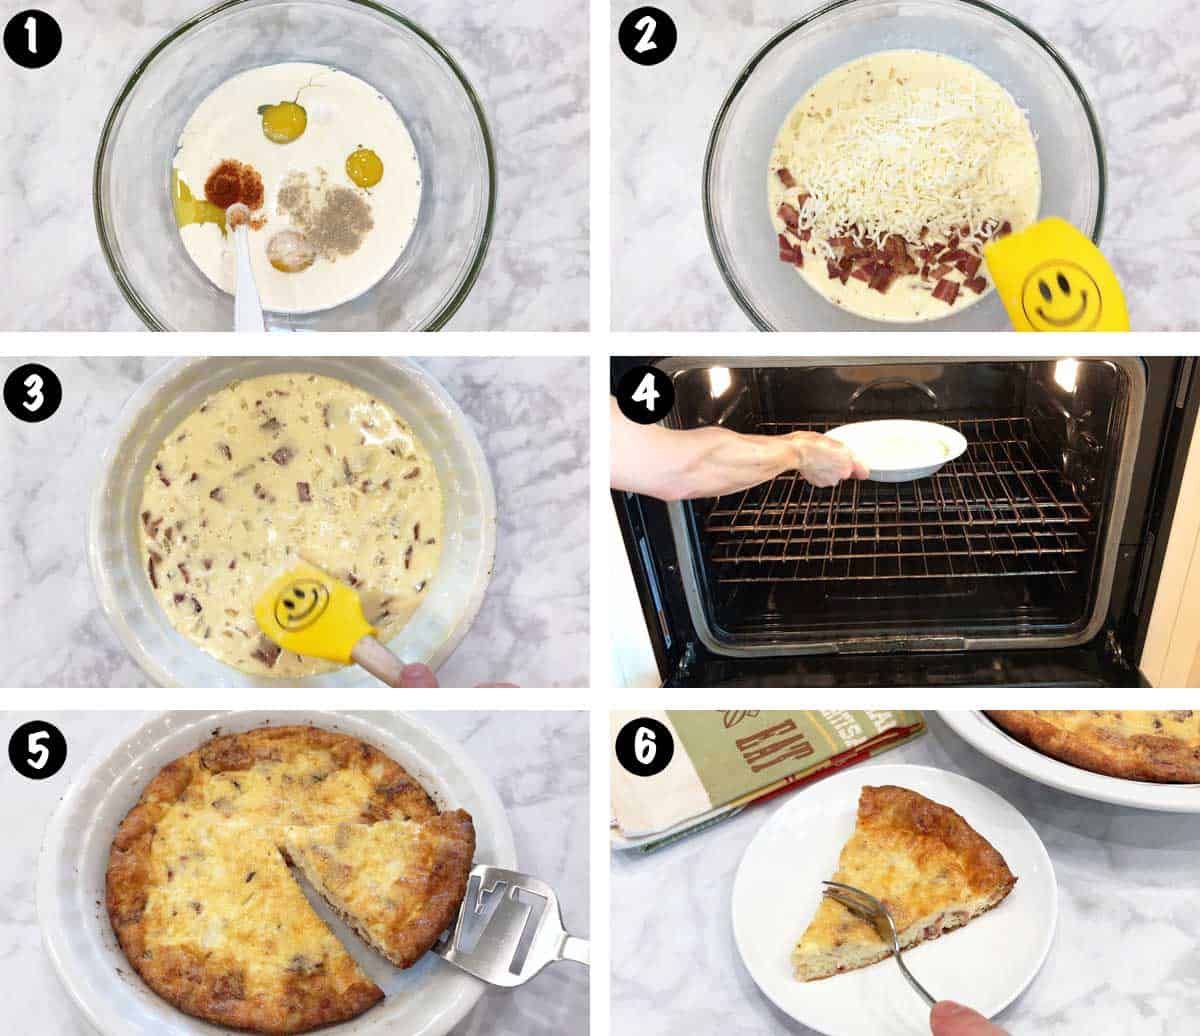 A photo collage showing the steps for making a crustless quiche Lorraine. 